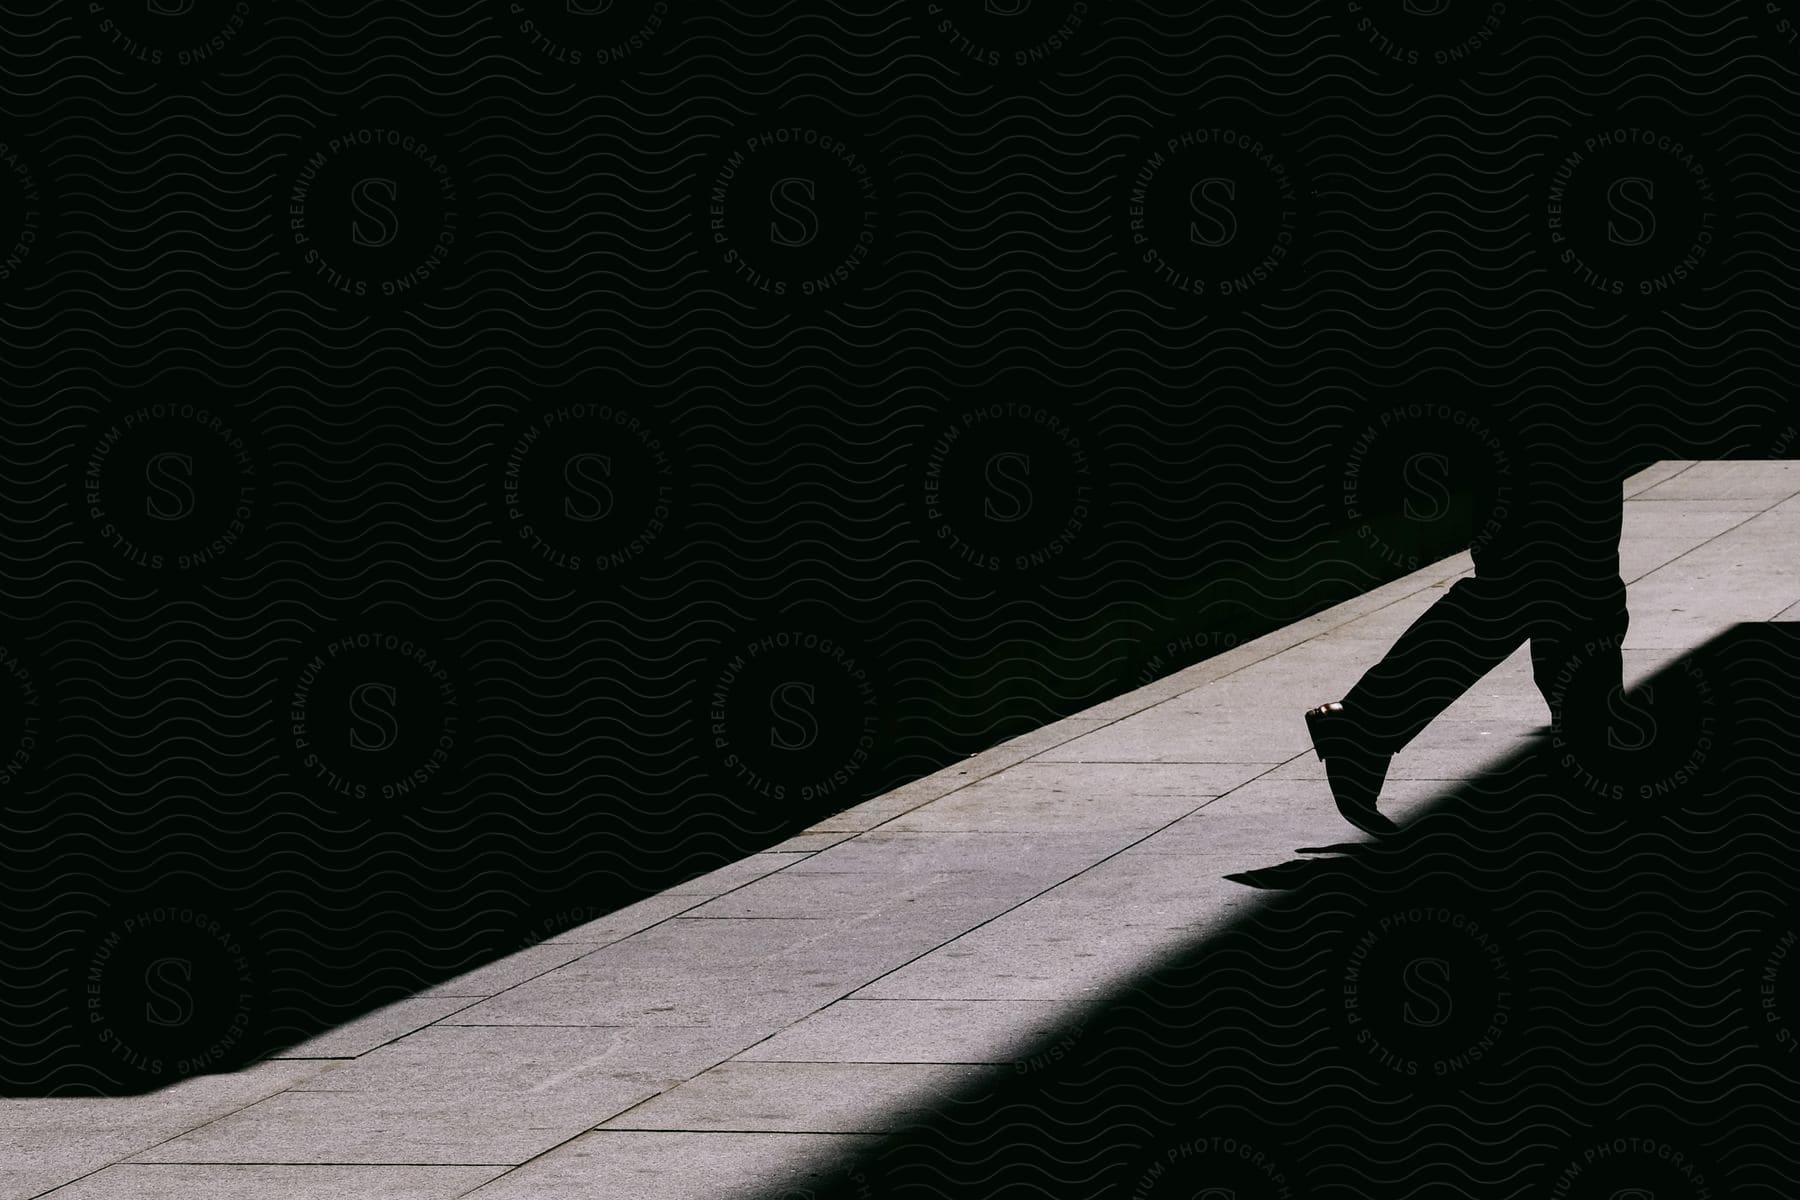 A man walking on a road surface in silhouette